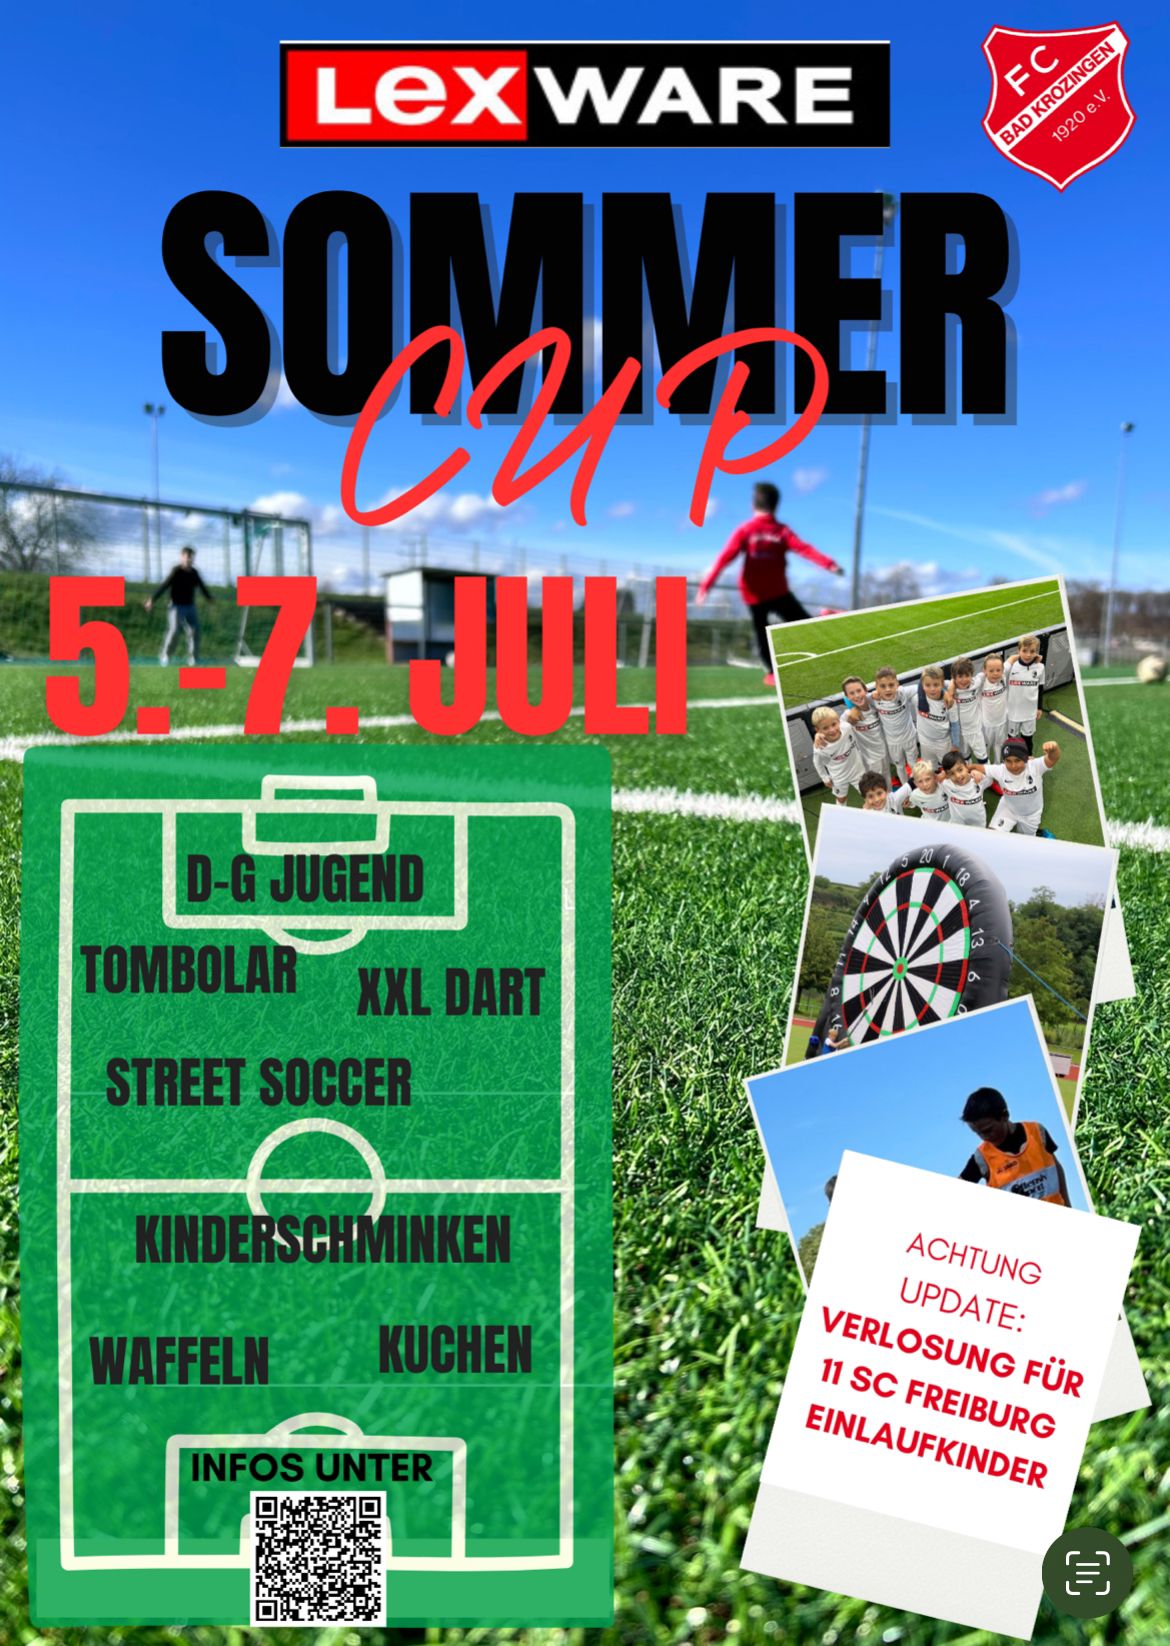 1 Lexware Sommer Cup